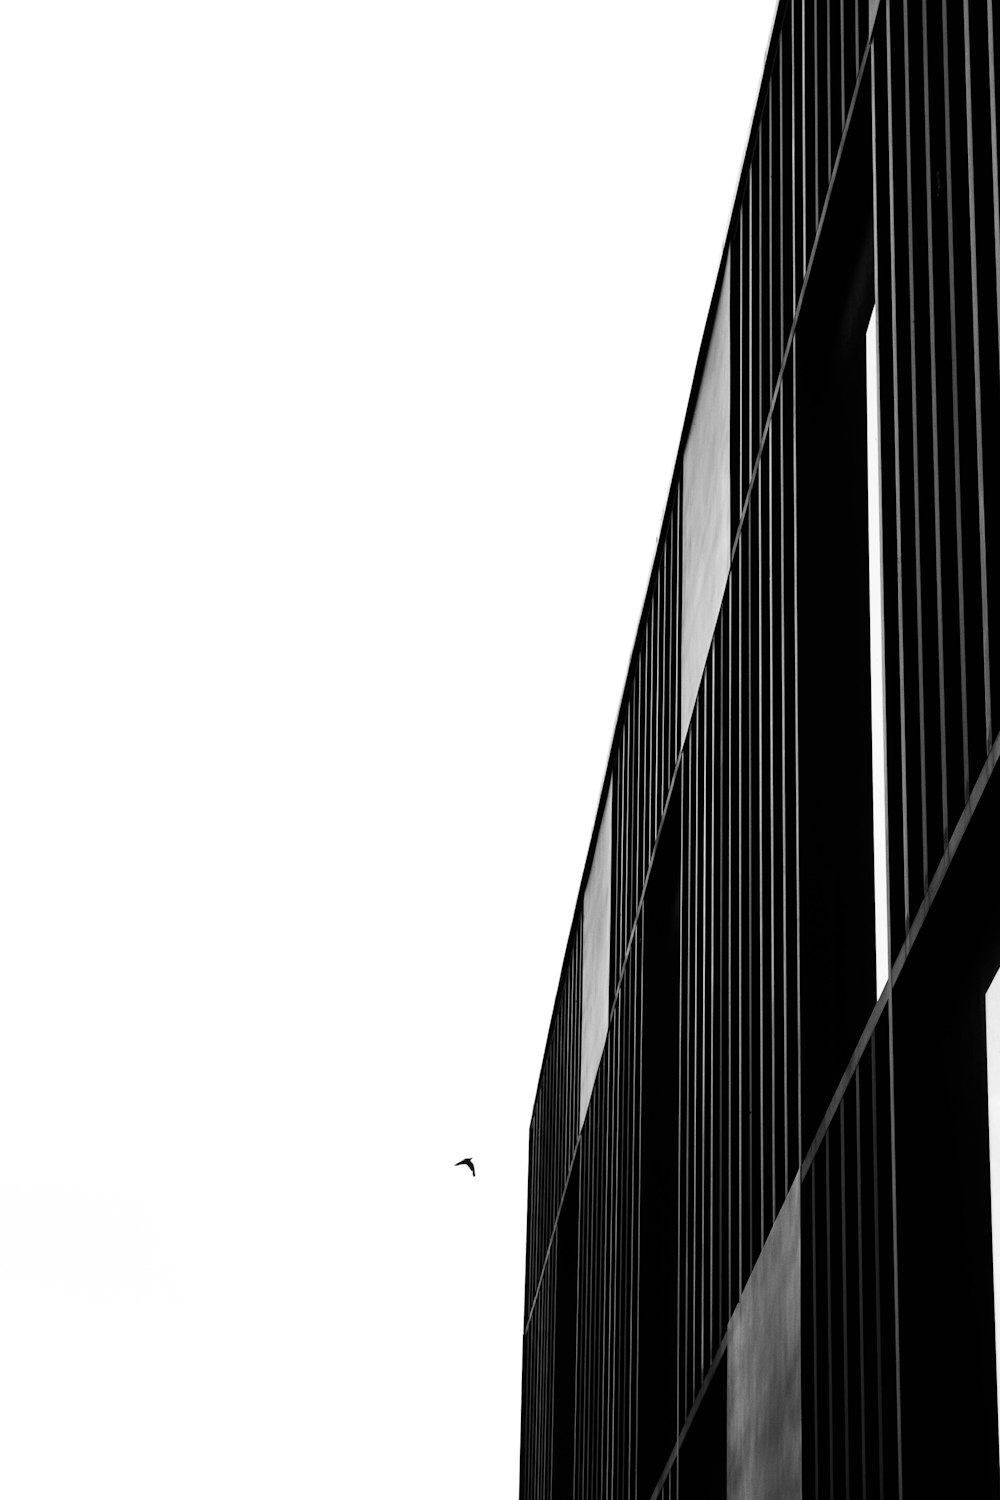 a black and white photo of a bird flying over a building